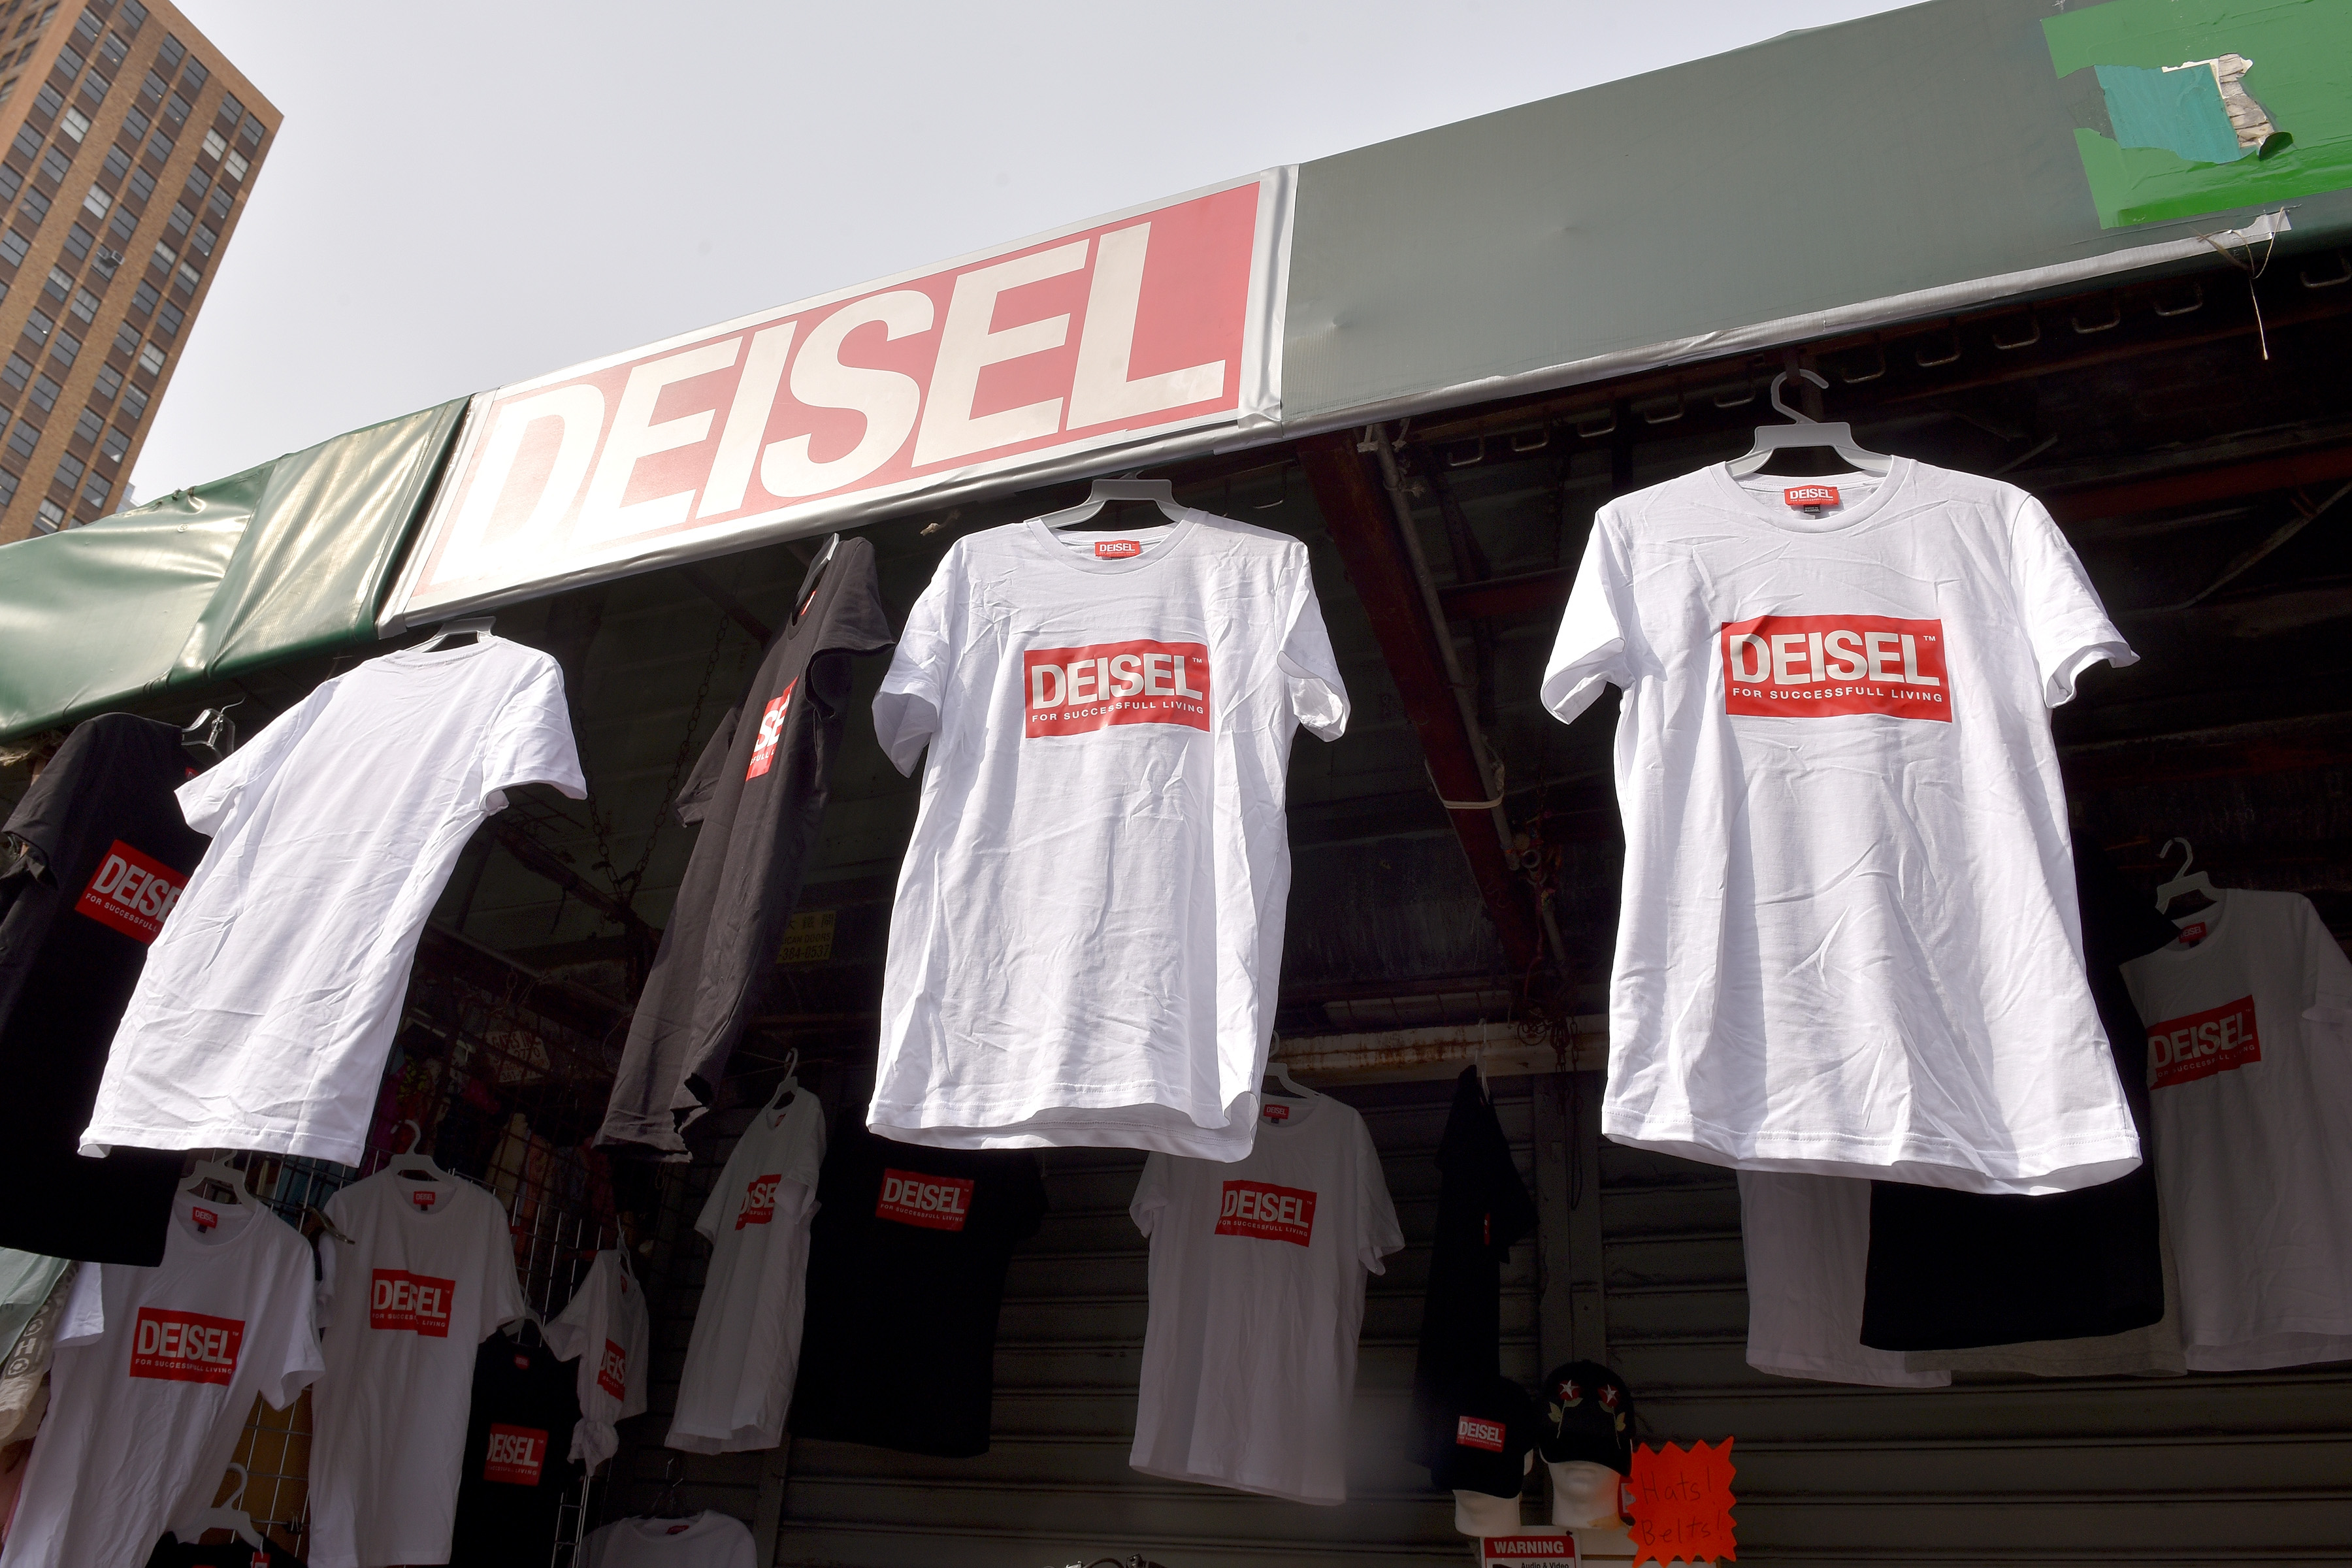 Why Diesel Opened a Deceptive NYC Pop-Up Store Selling Knockoffs